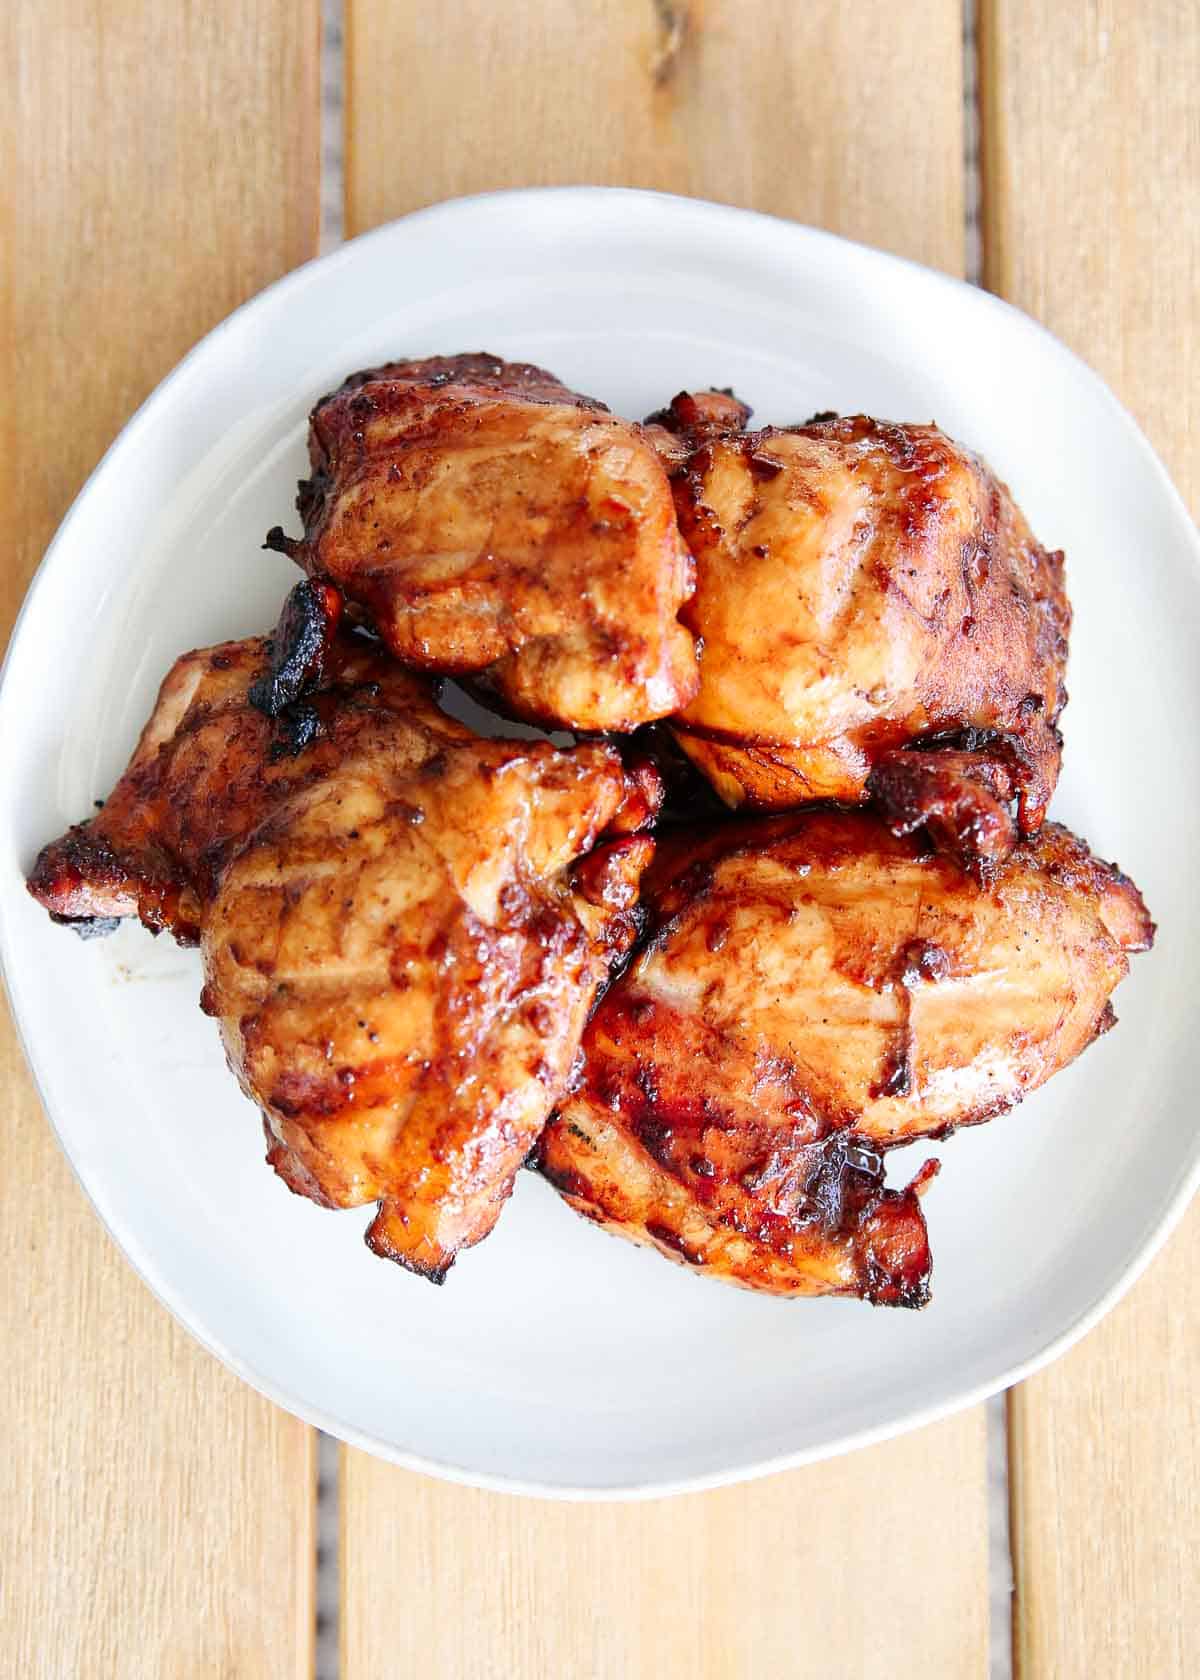 Grilled chicken thighs on a white plate.